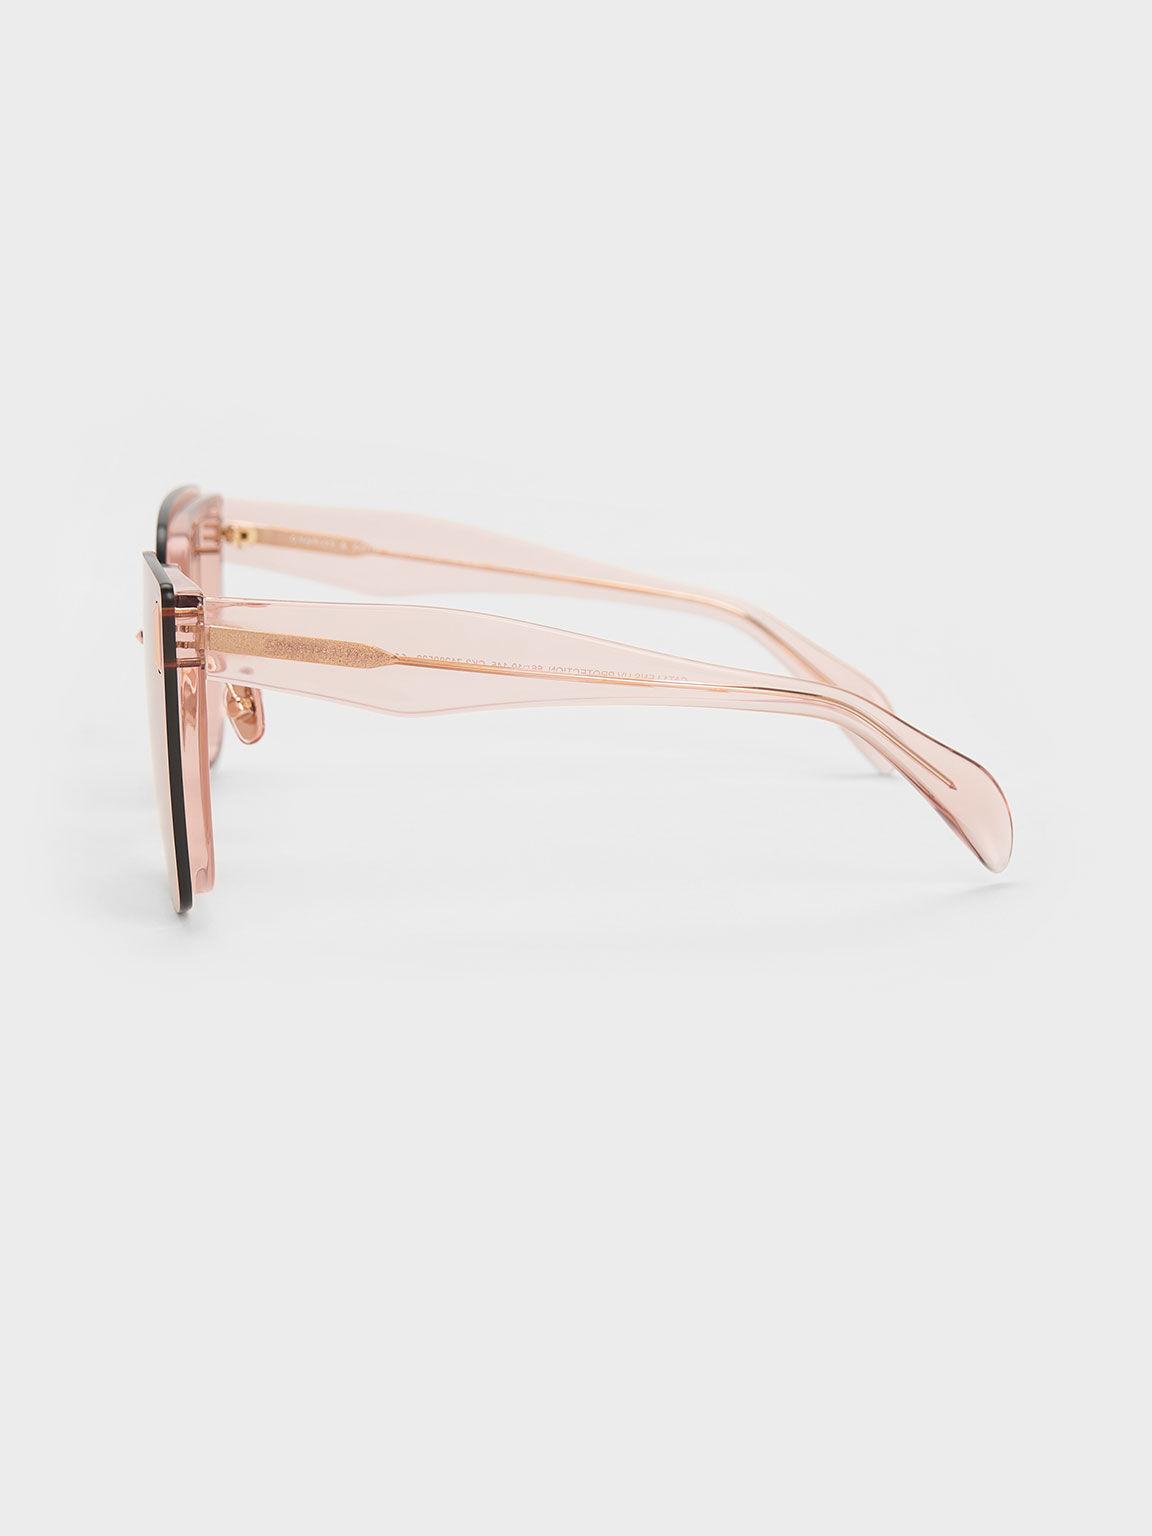 & Acetate Pink CHARLES - KEITH US Geometric Recycled Sunglasses Butterfly